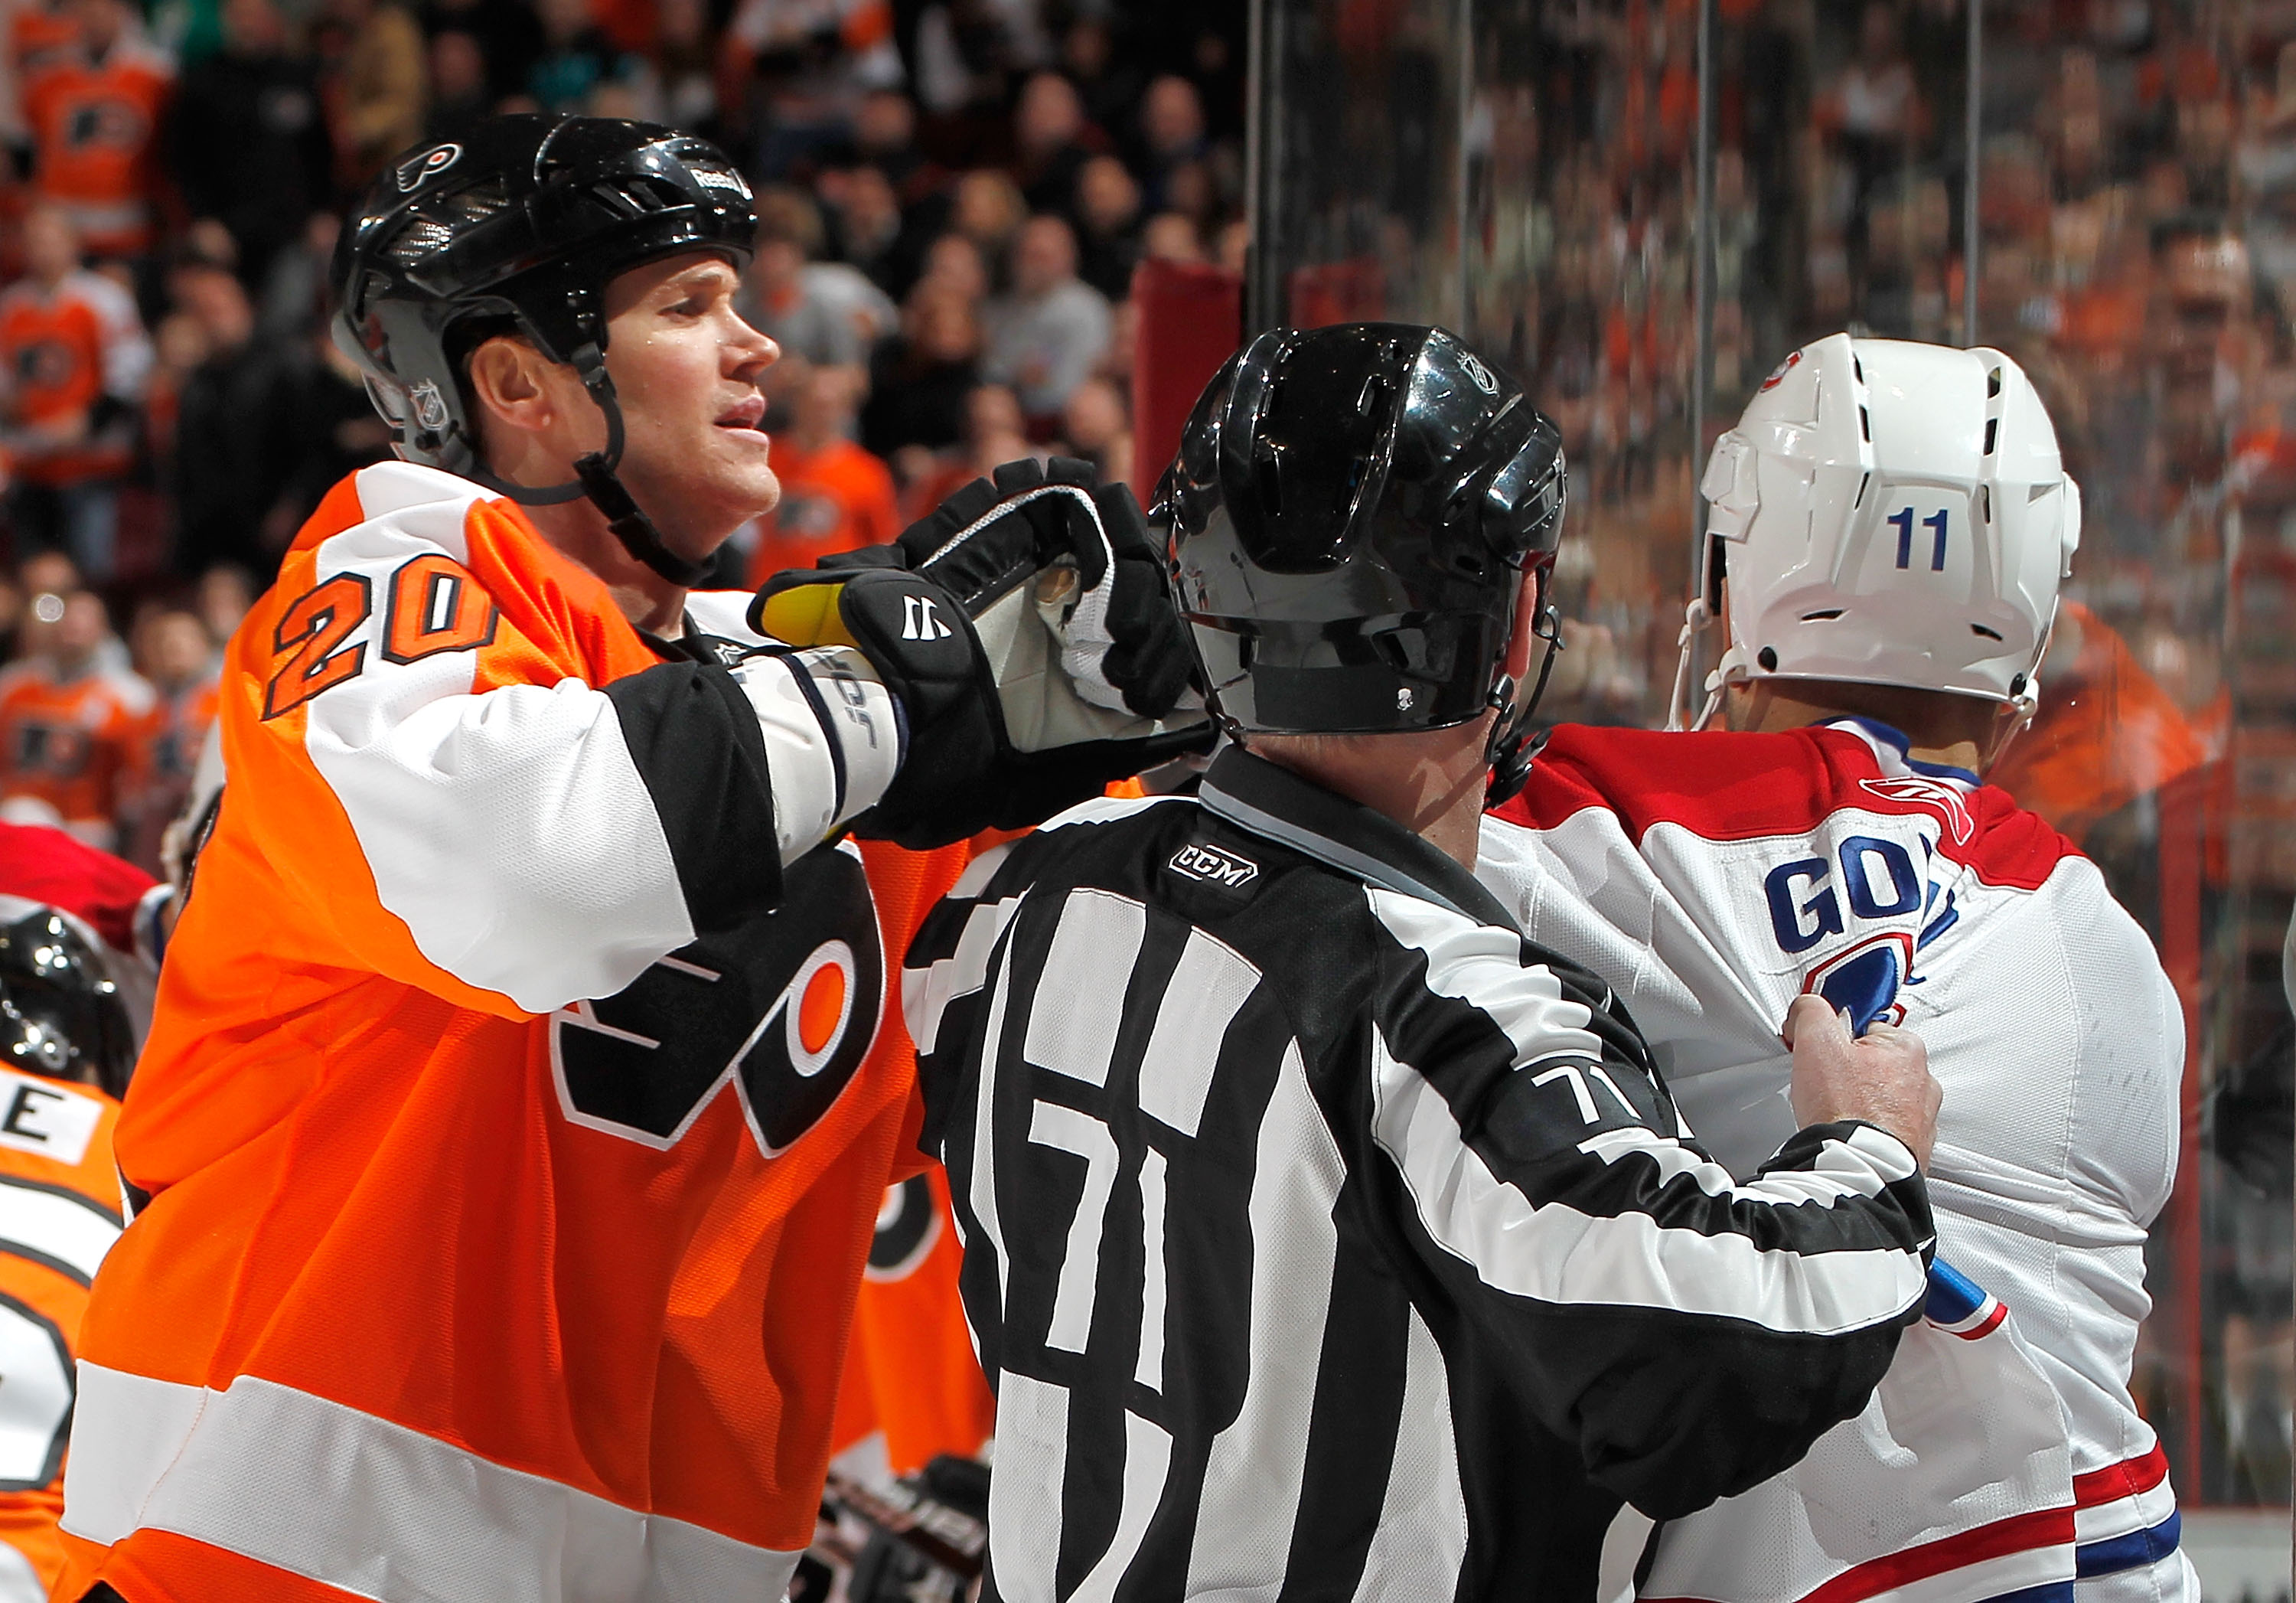 NHL -- Chris Pronger had a rough ride on his way to the Hockey